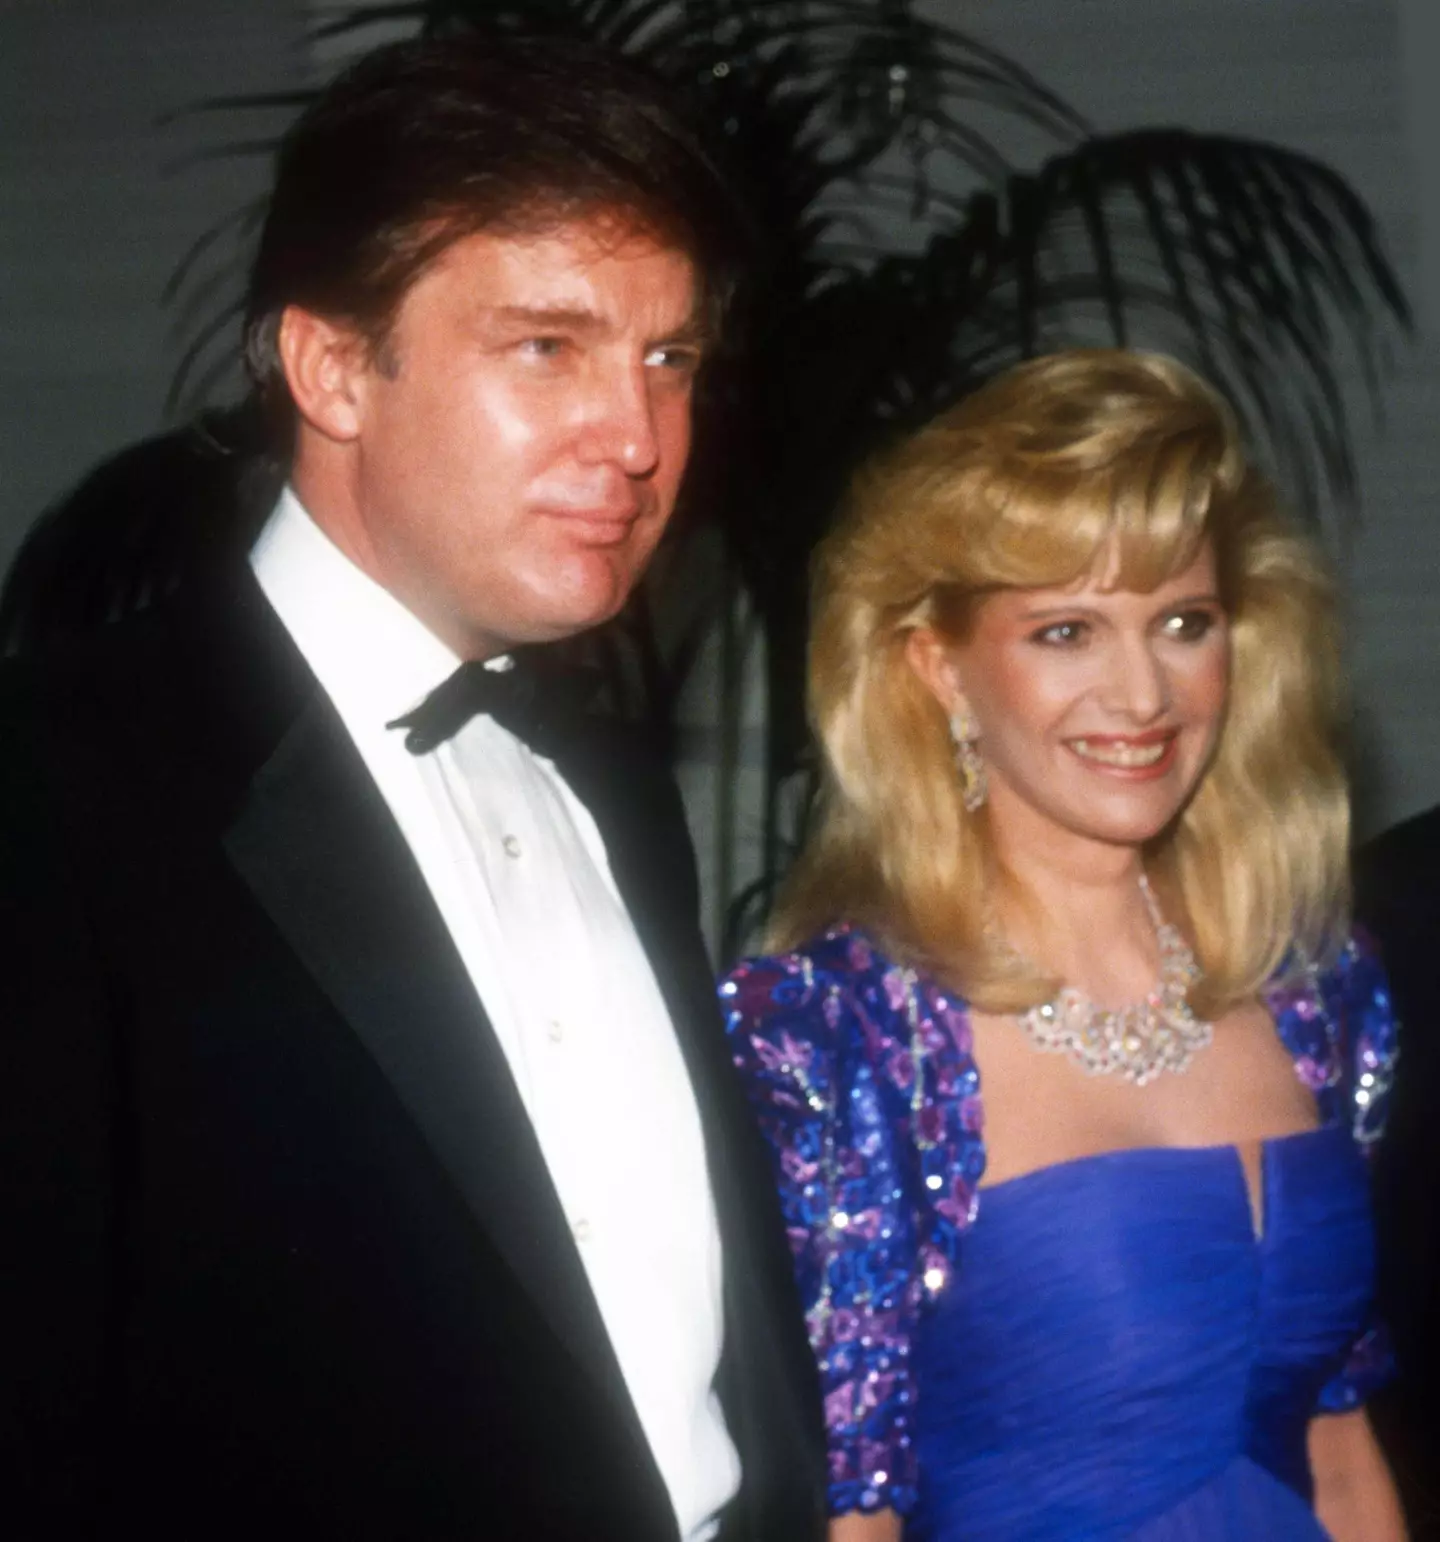 Trump and Ivana married in 1977.